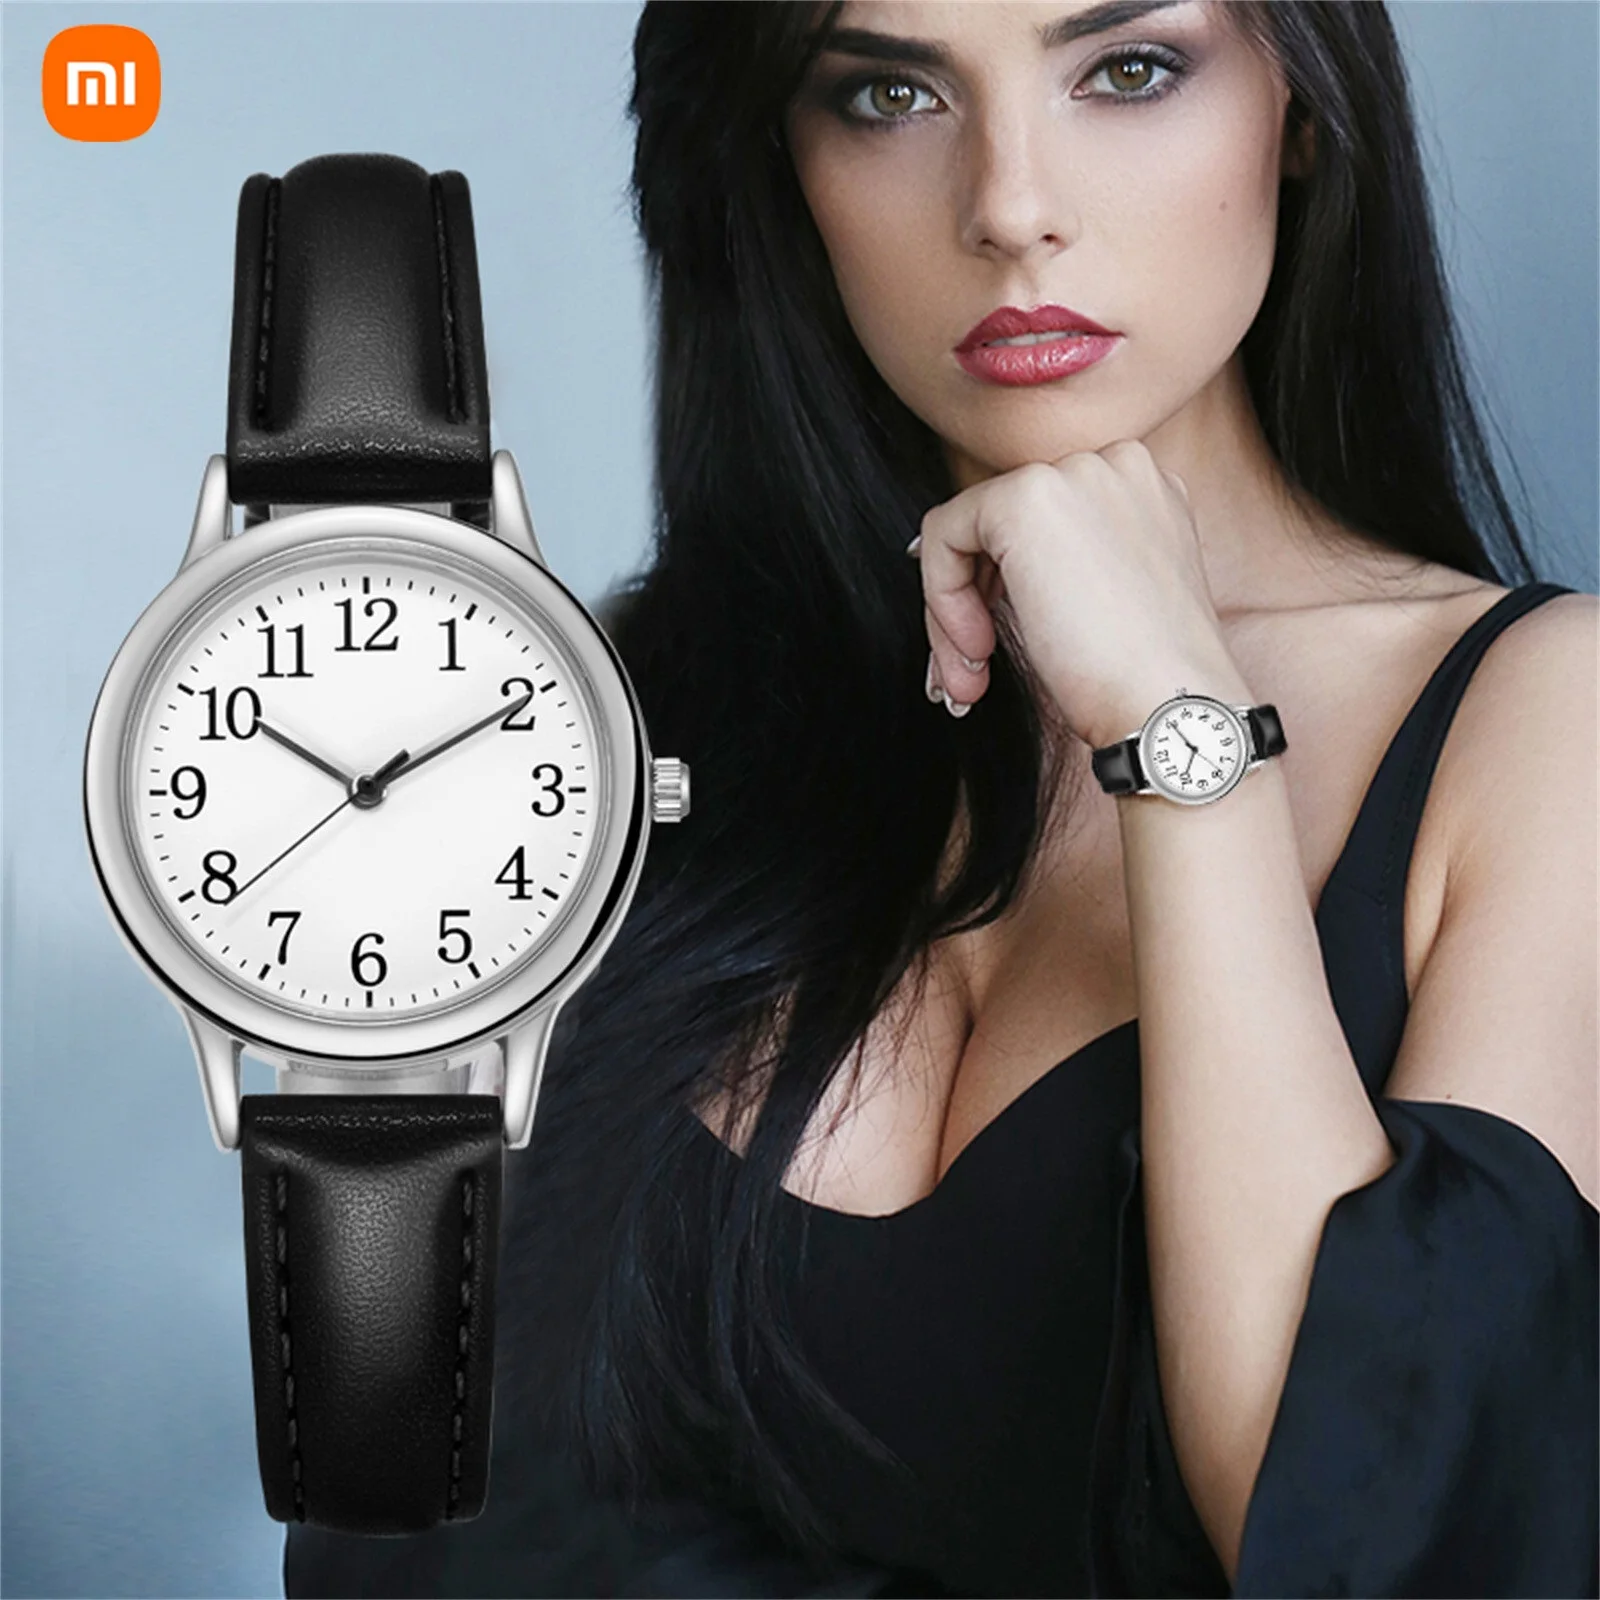 

Millet Luxury Watch For Women Easy To Read Arabic Numerals Simple-dial Quartz Wristwatches Ladies Leather Strap Digital Watches